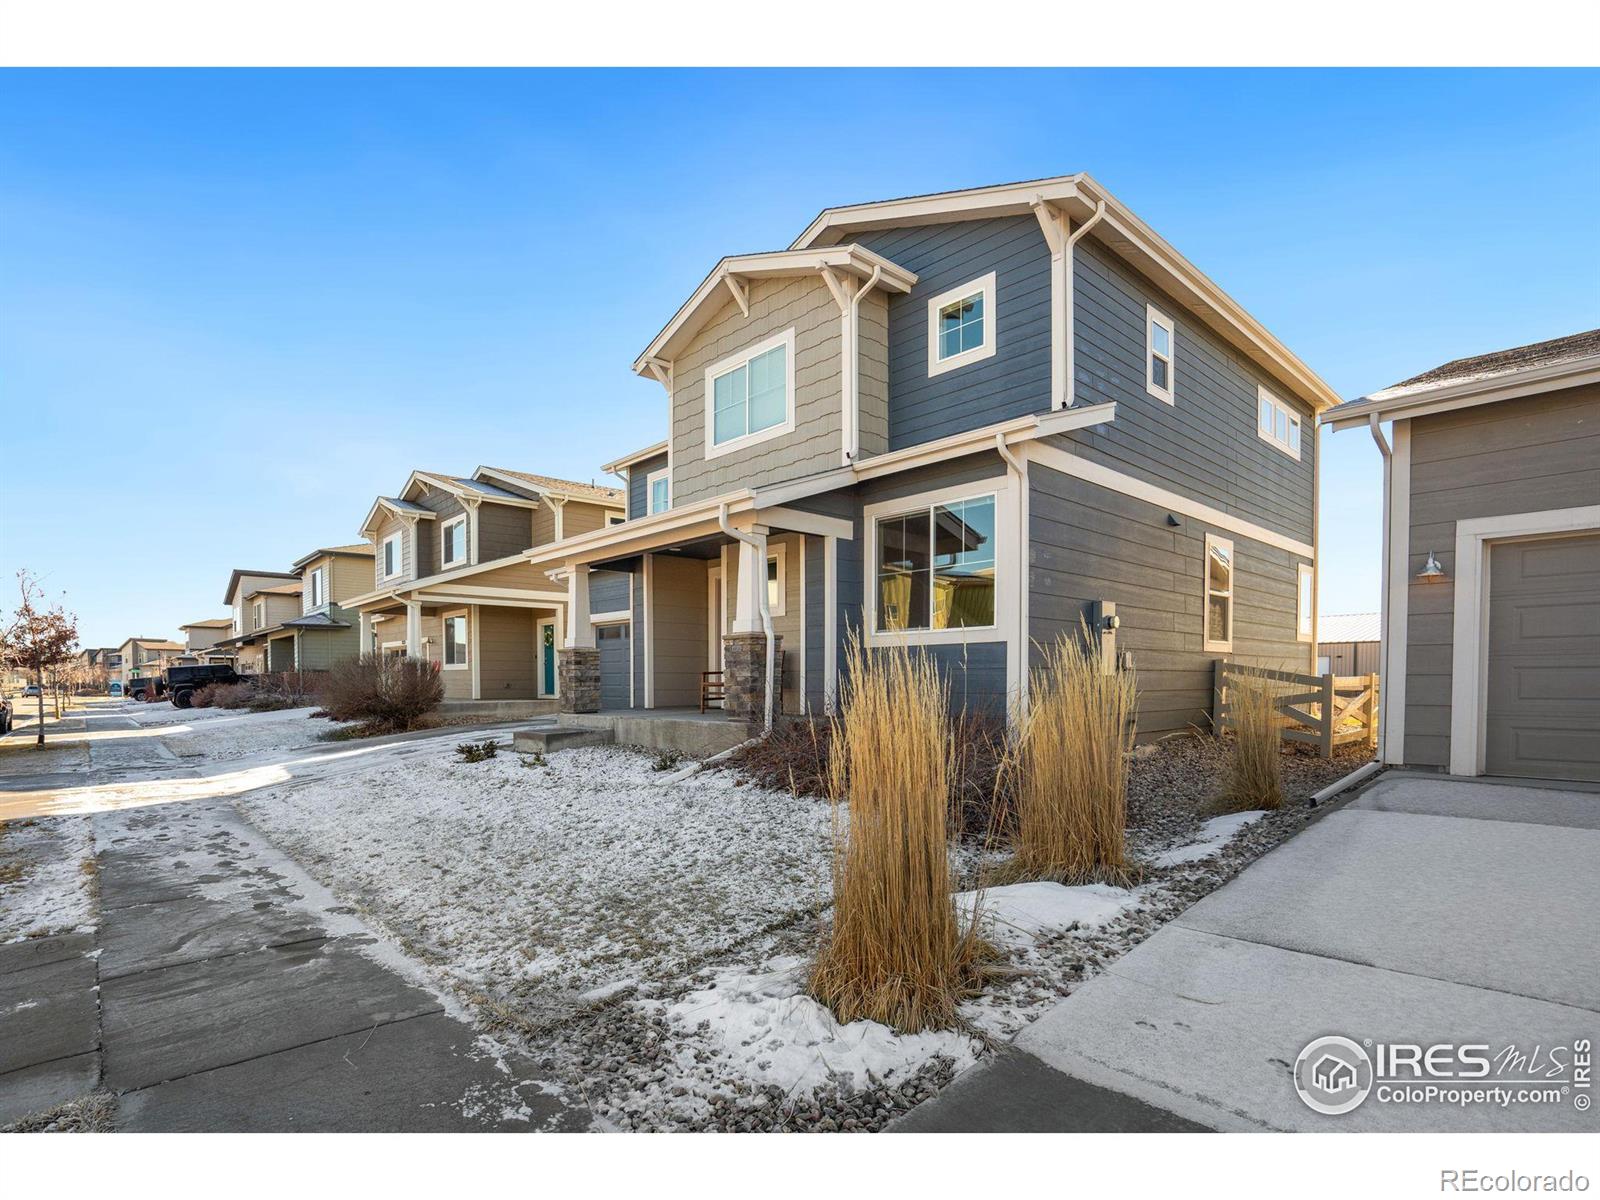 Report Image for 2127  Saison Street,Fort Collins, Colorado